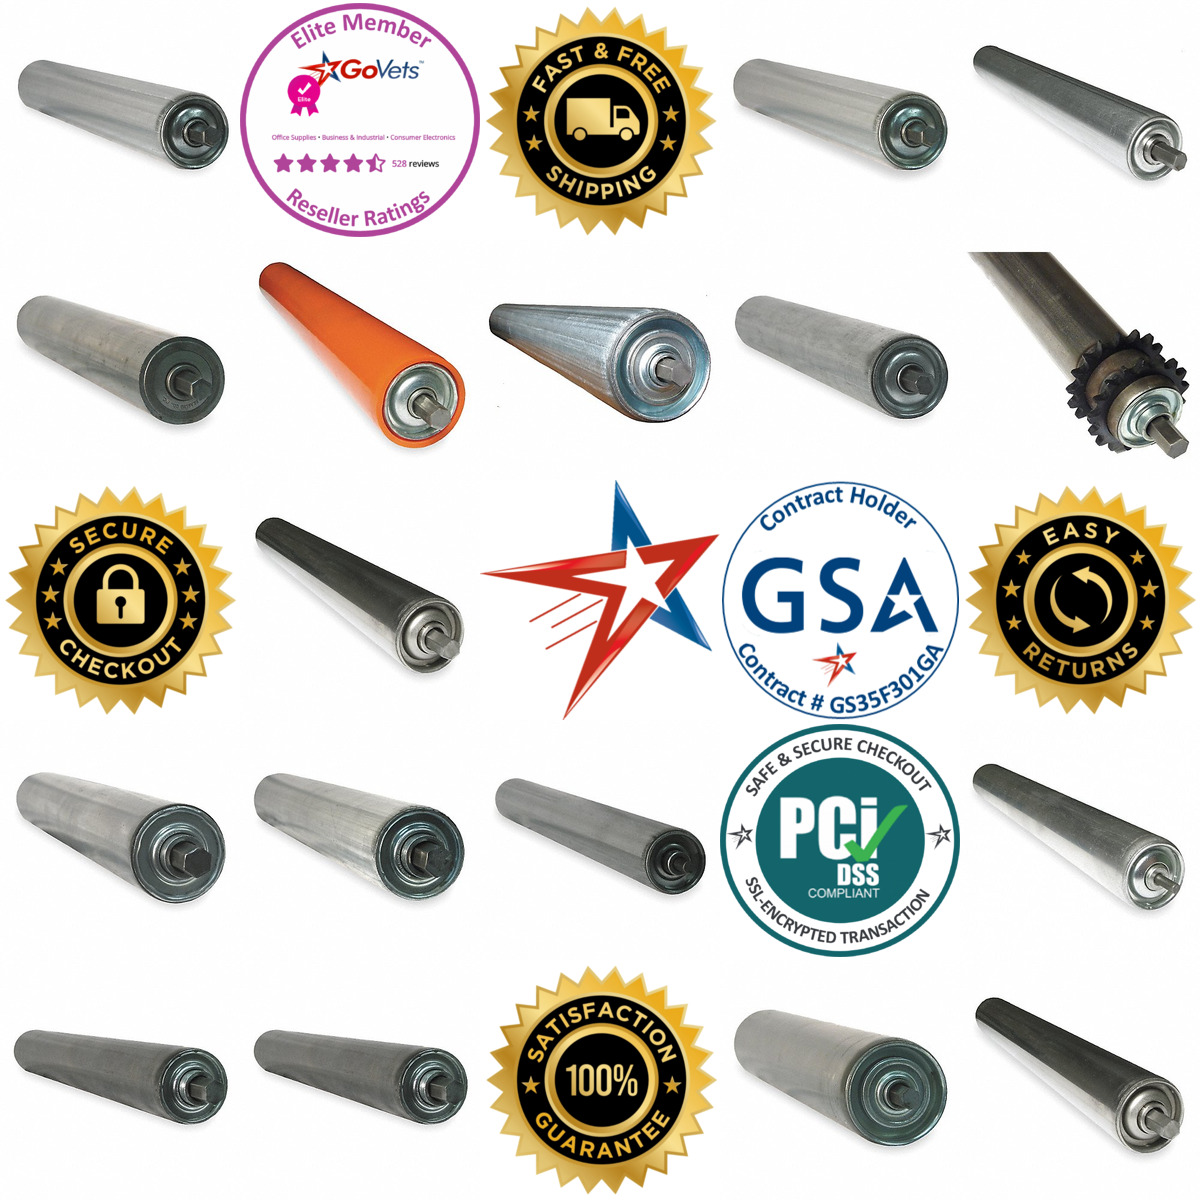 A selection of Conveyor Rollers products on GoVets